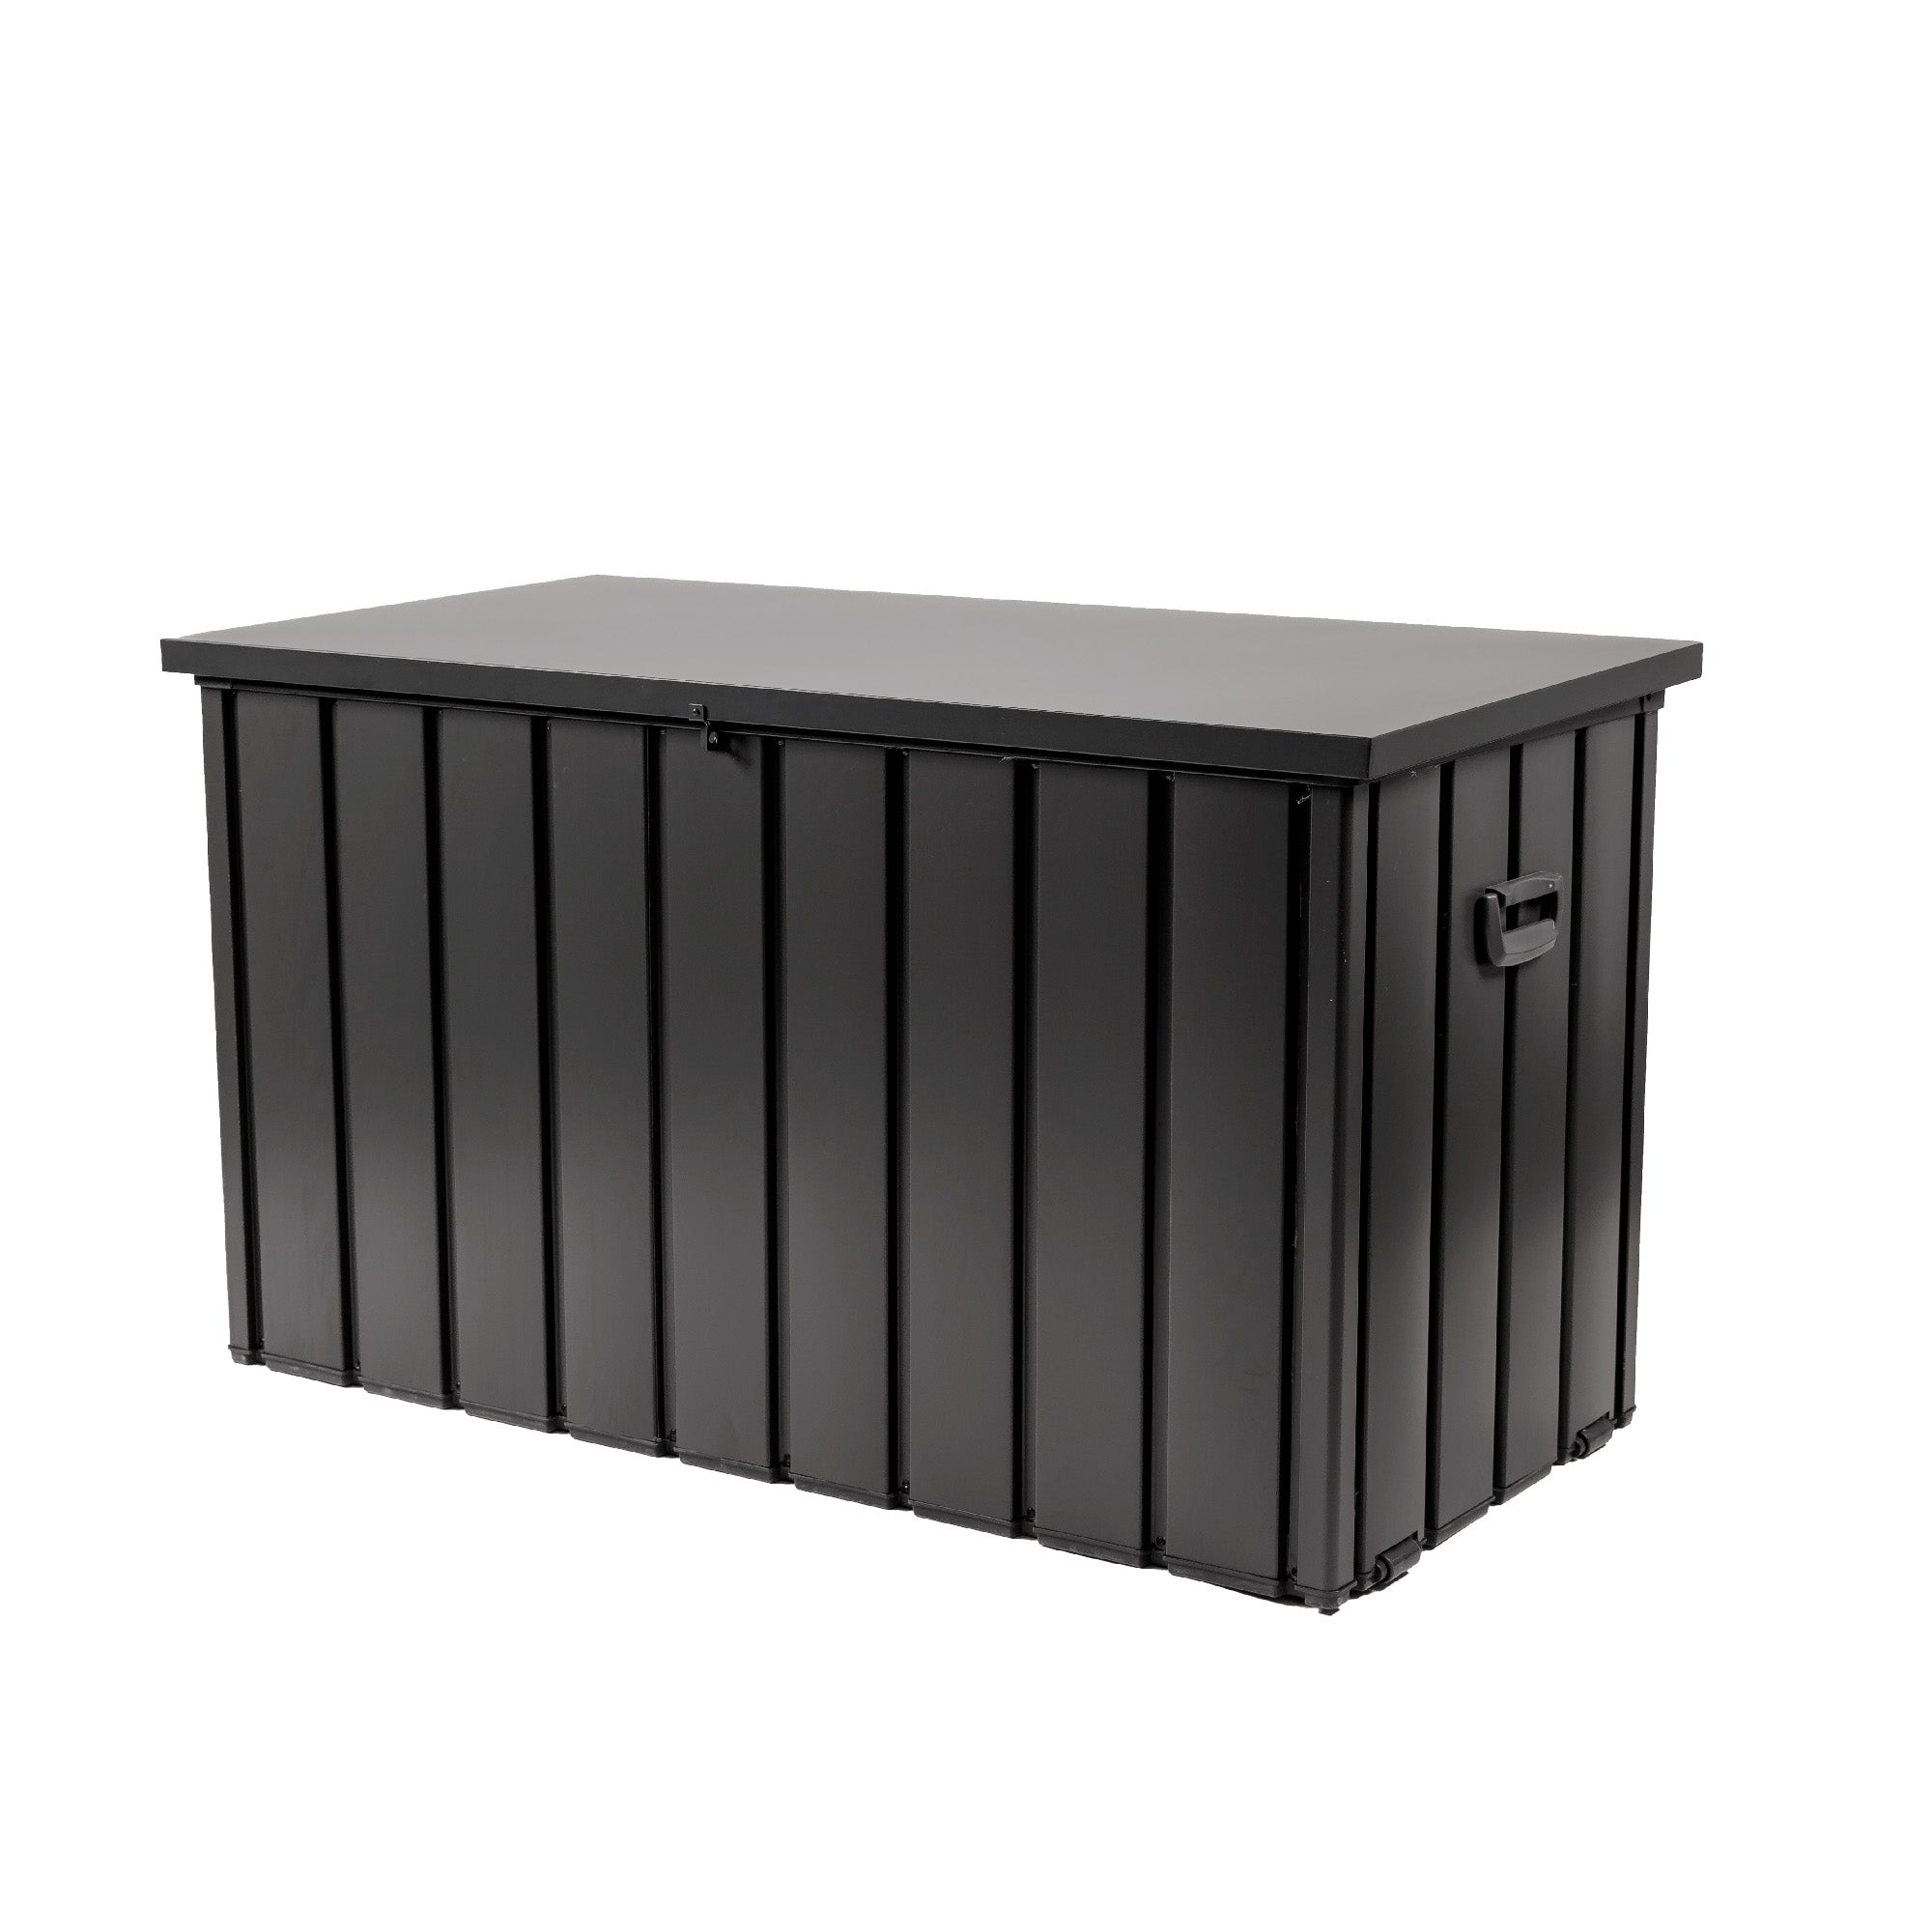 ParcelWirx Max 49" x 24" x 27" Package Delivery Box, Graphite Color